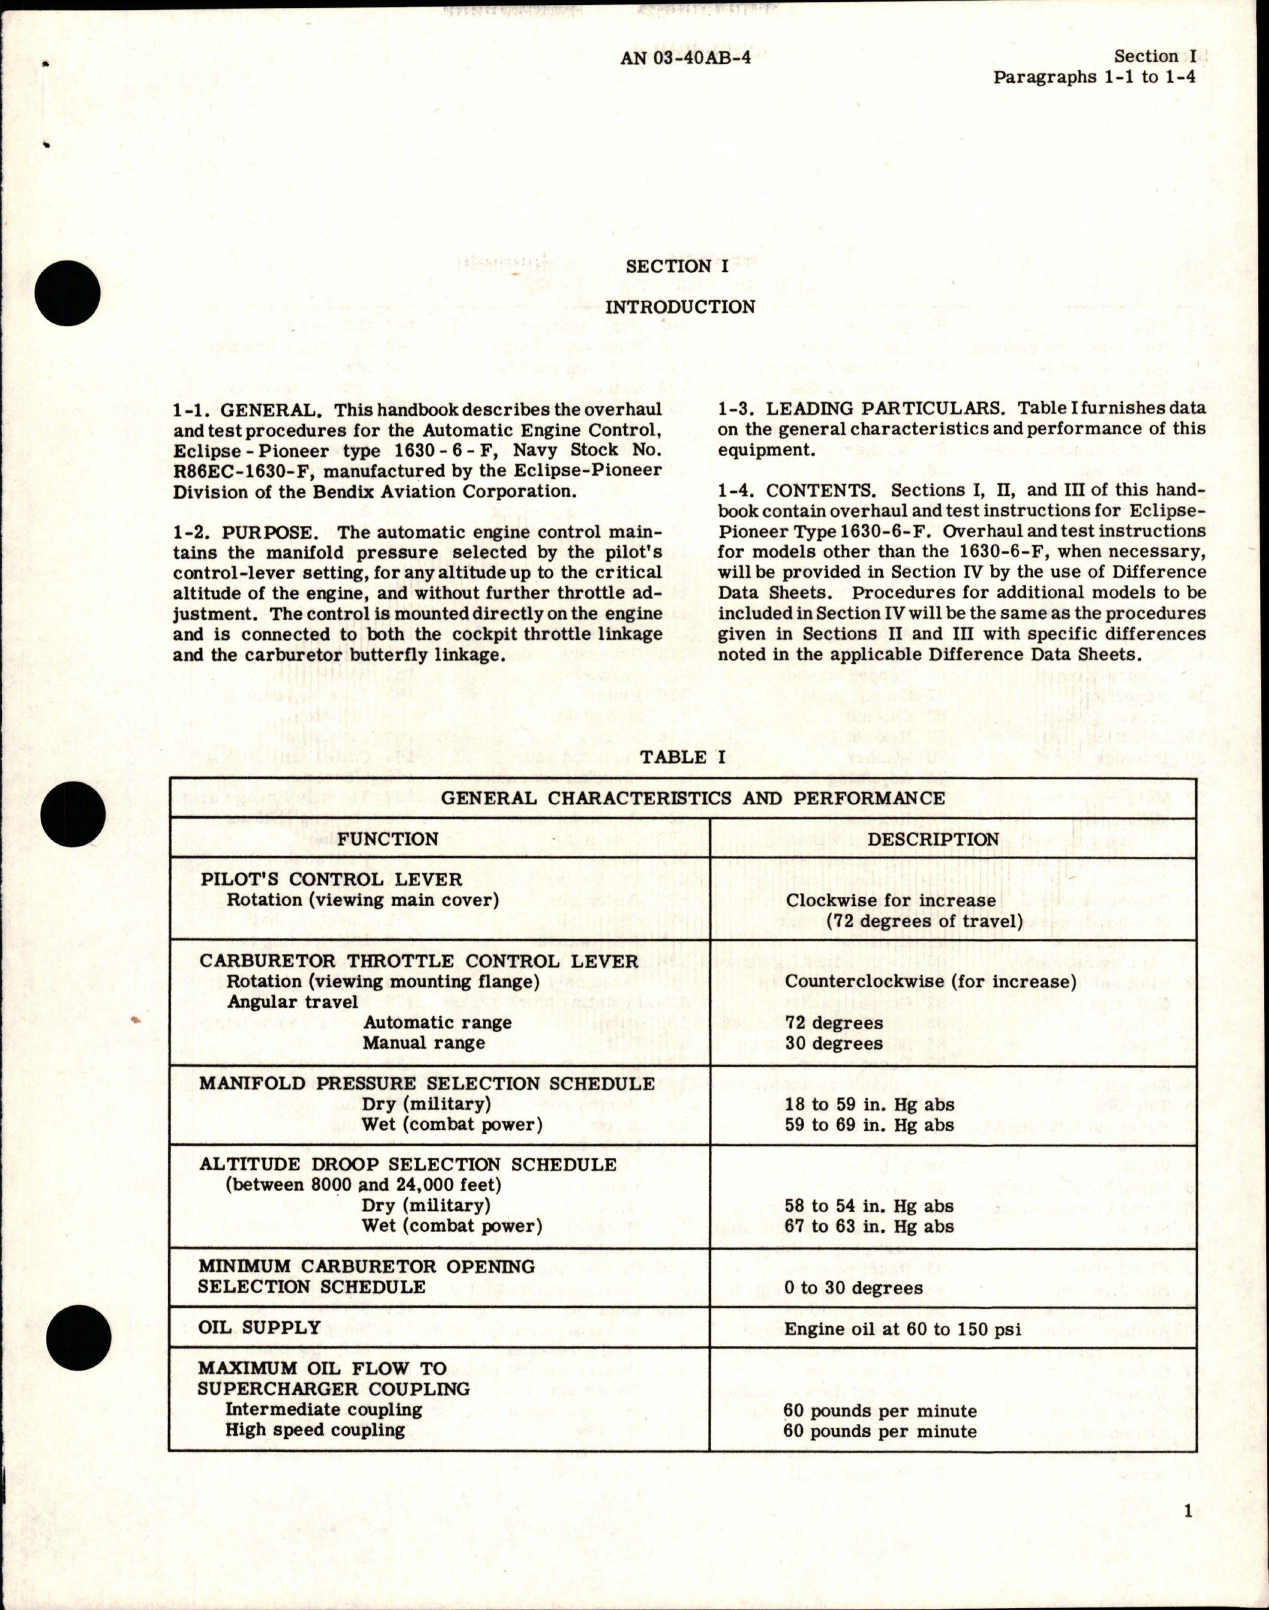 Sample page 5 from AirCorps Library document: Overhaul Instructions for Automatic Engine Control - Part 1630-6-F 